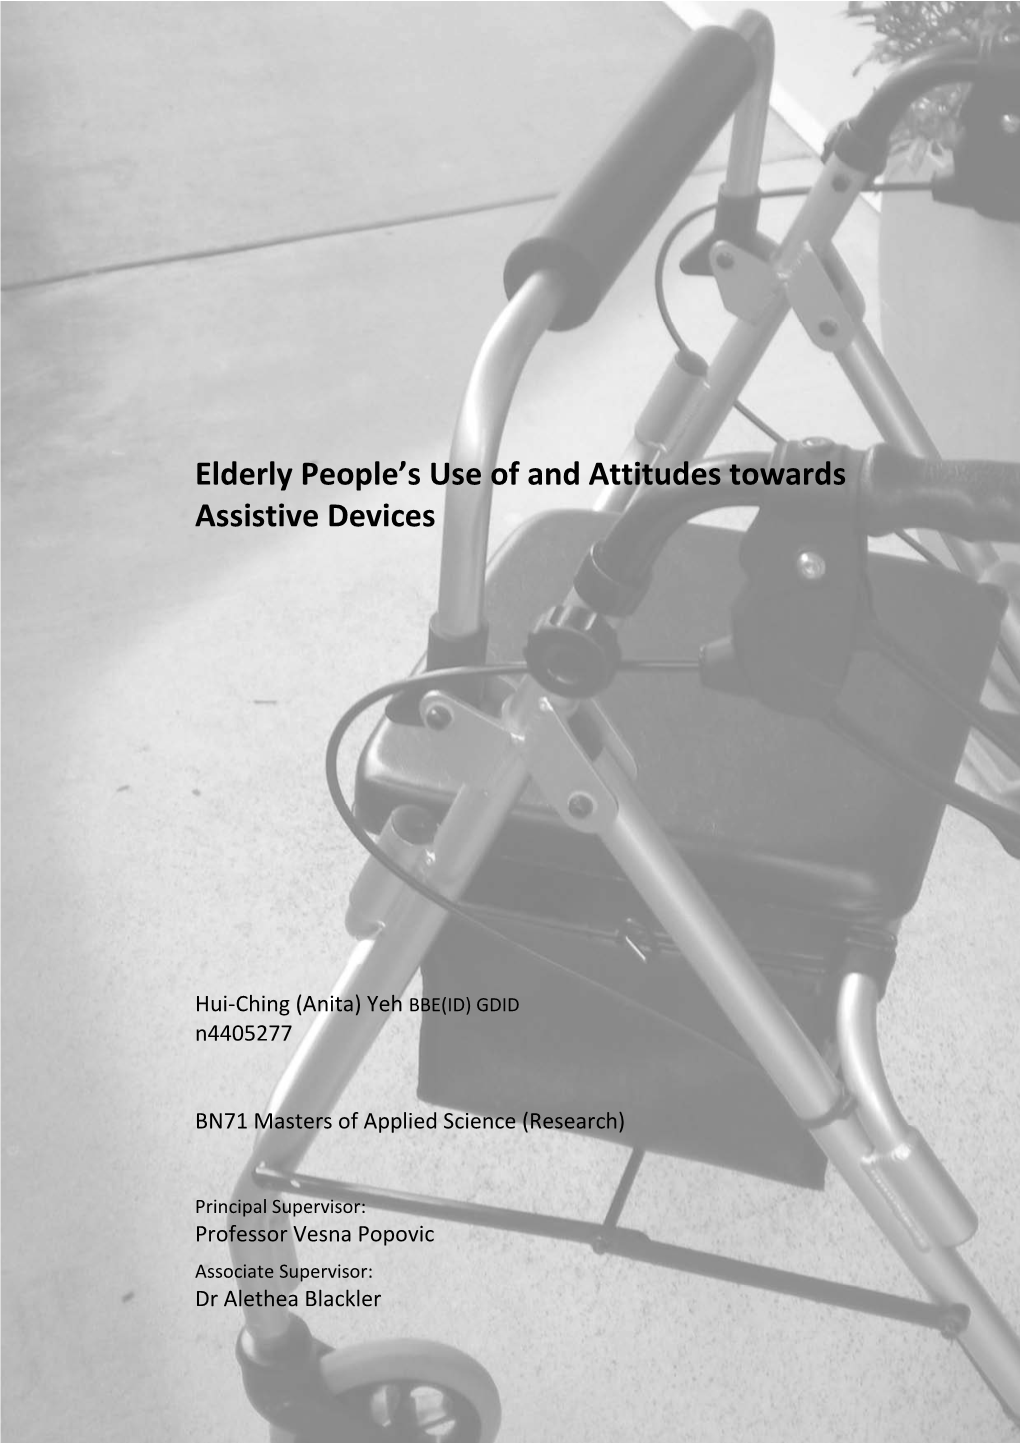 Elderly People's Use of and Attitudes Towards Assistive Devices